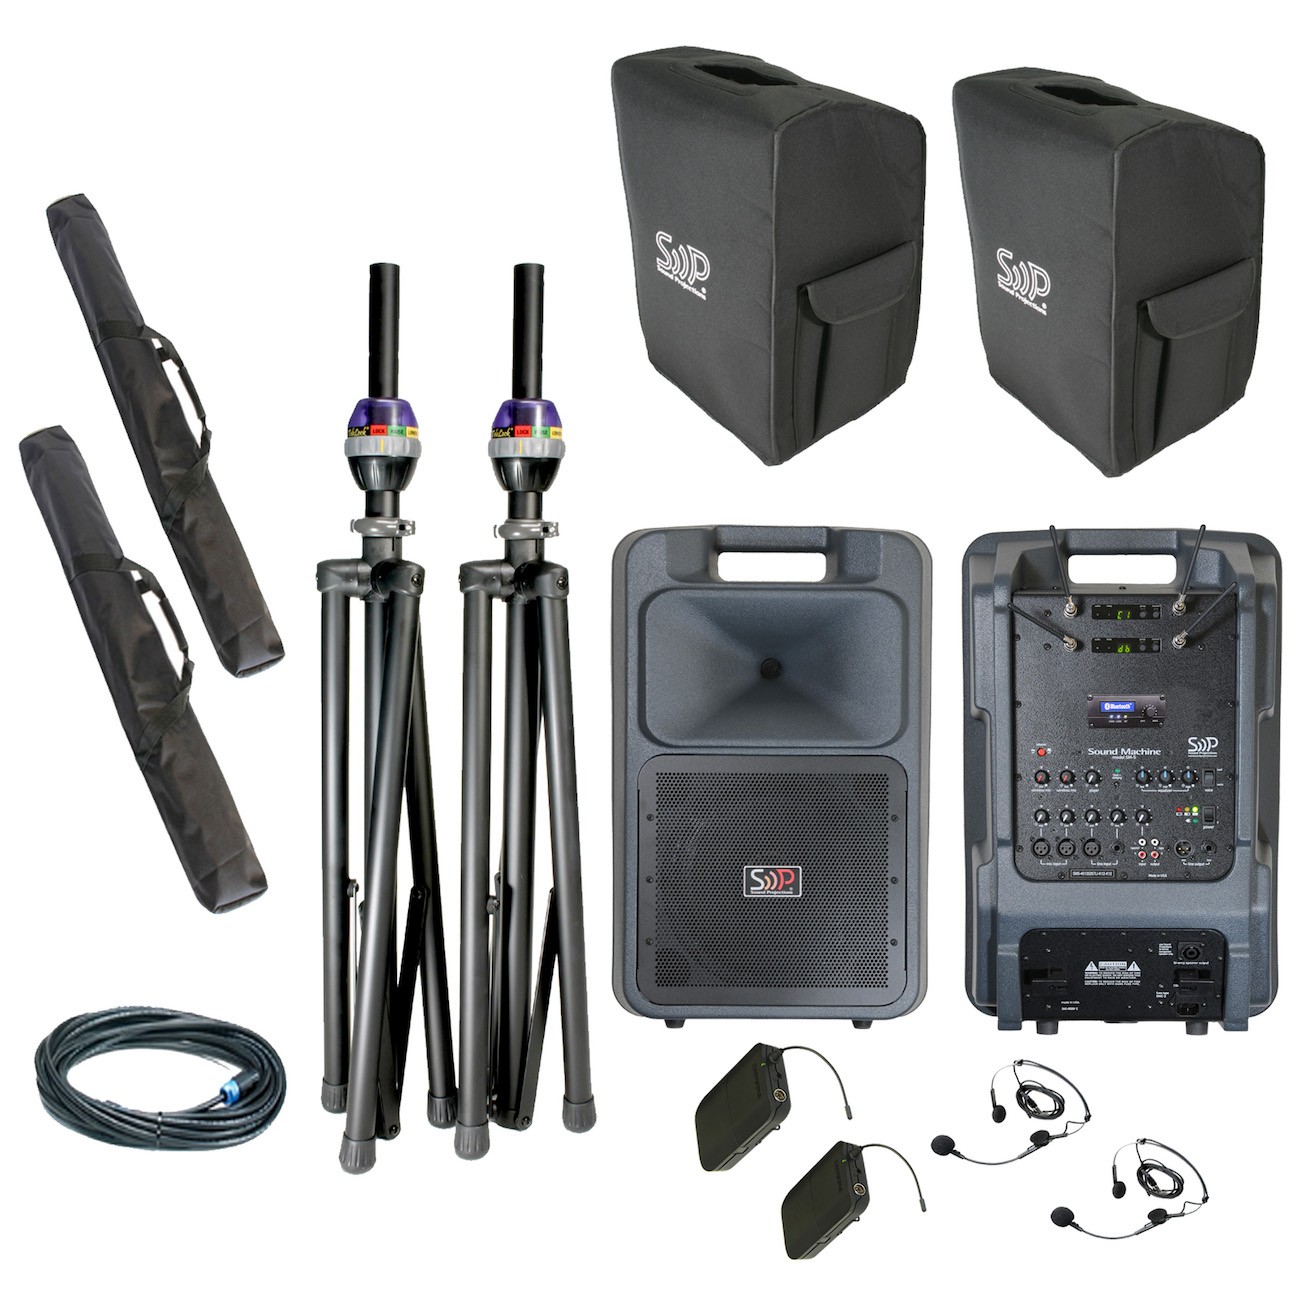 Sound Projections SM-5 Dual UHF Headset Wireless OPT-600 Bluetooth & Comp Speaker